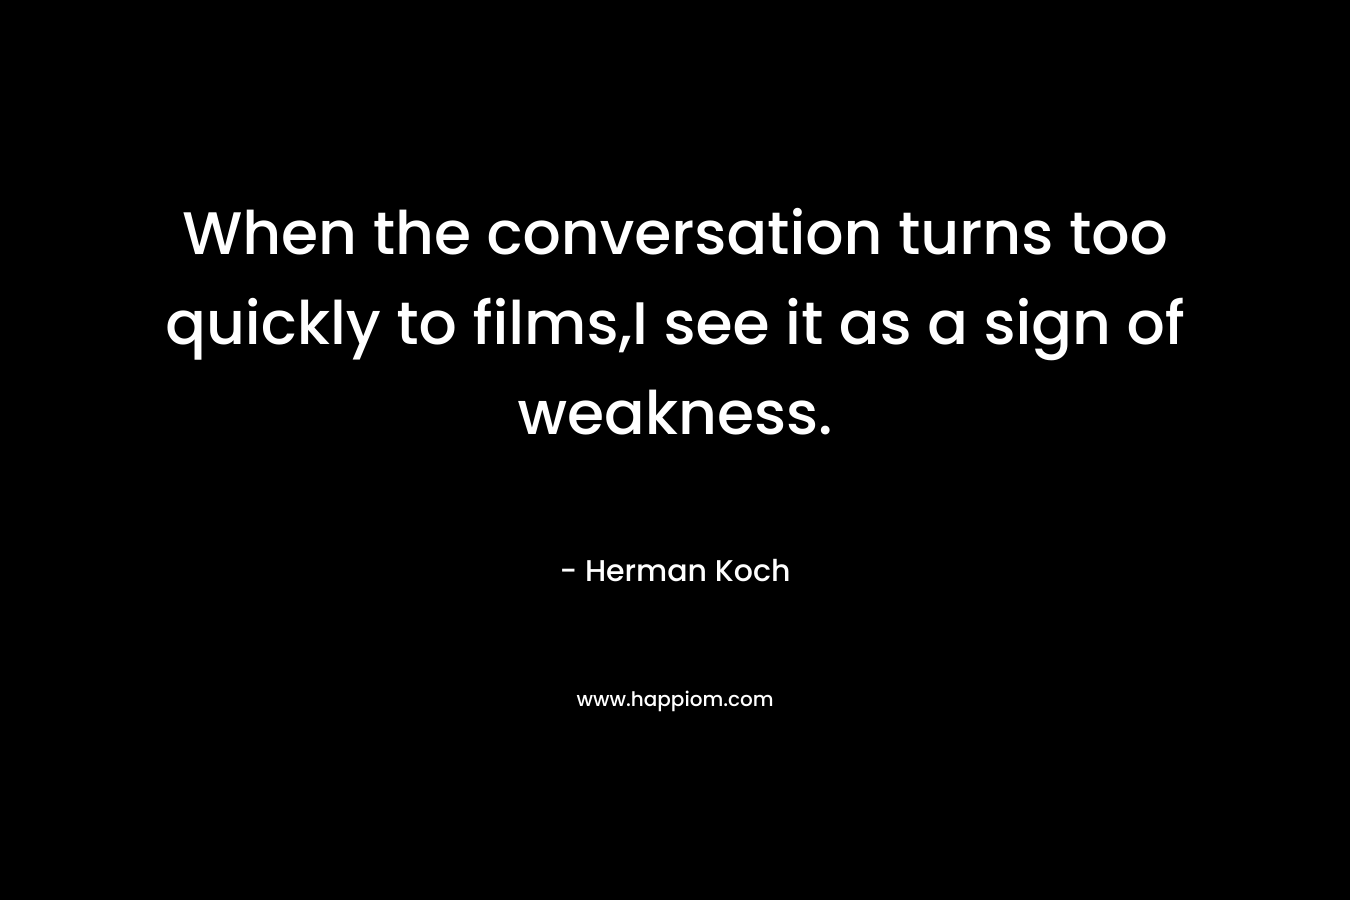 When the conversation turns too quickly to films,I see it as a sign of weakness. – Herman Koch